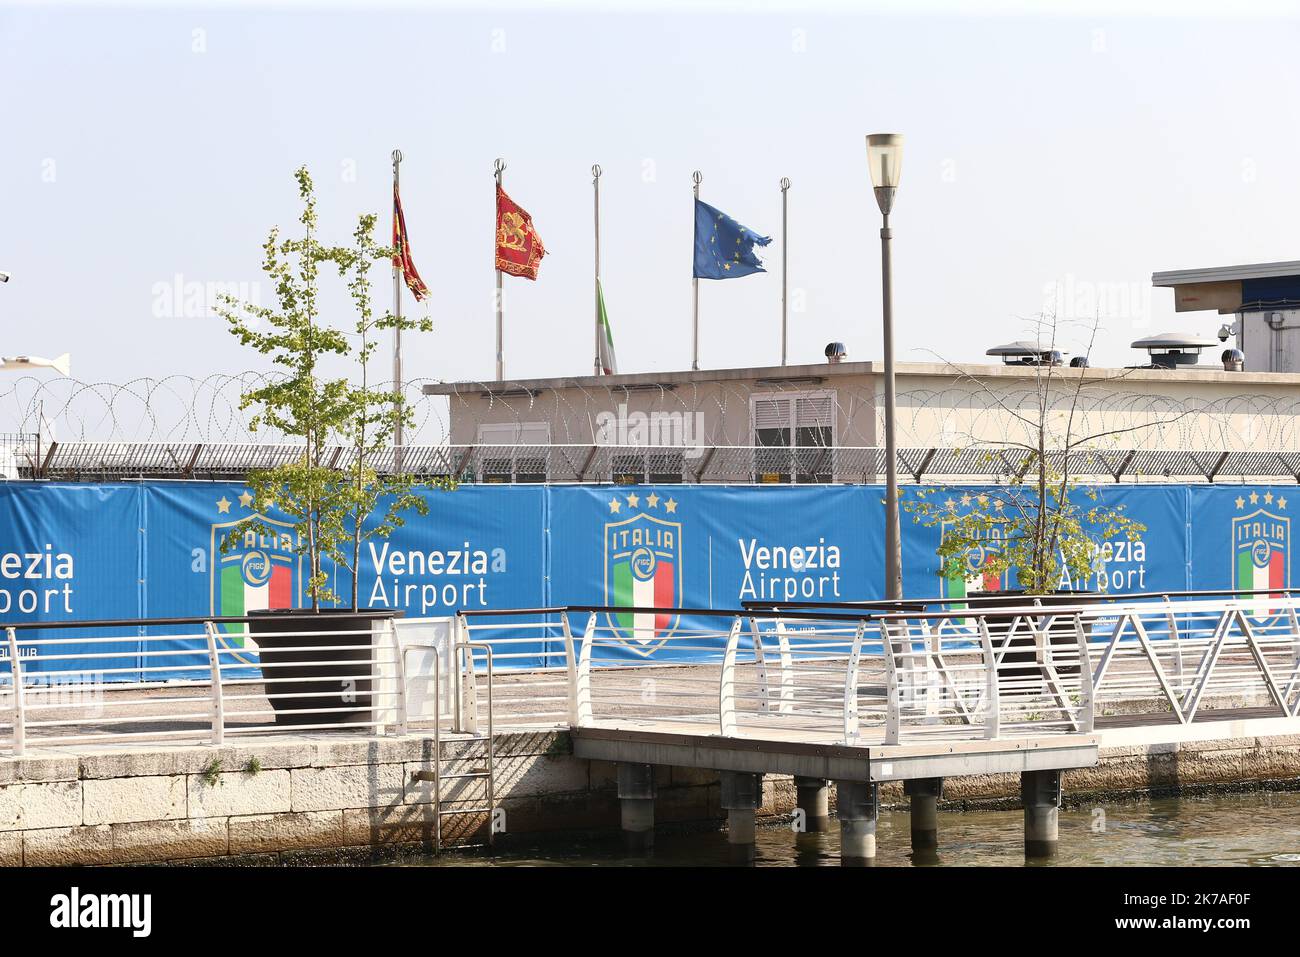 ©Pierre Teyssot/MAXPPP ; Coronavirus Outbreak - Marco Polo Airport on 12th of August 2020, Venice, Italy. A reduction in air traffic and the number of tourists coming by air and transiting through the airport to visit the Serenissima is being observed due to the Covid-19 pandemic. The tourism economy is in deep crisis. Empty Pier and airport. Â© Pierre Teyssot / Maxppp  Stock Photo